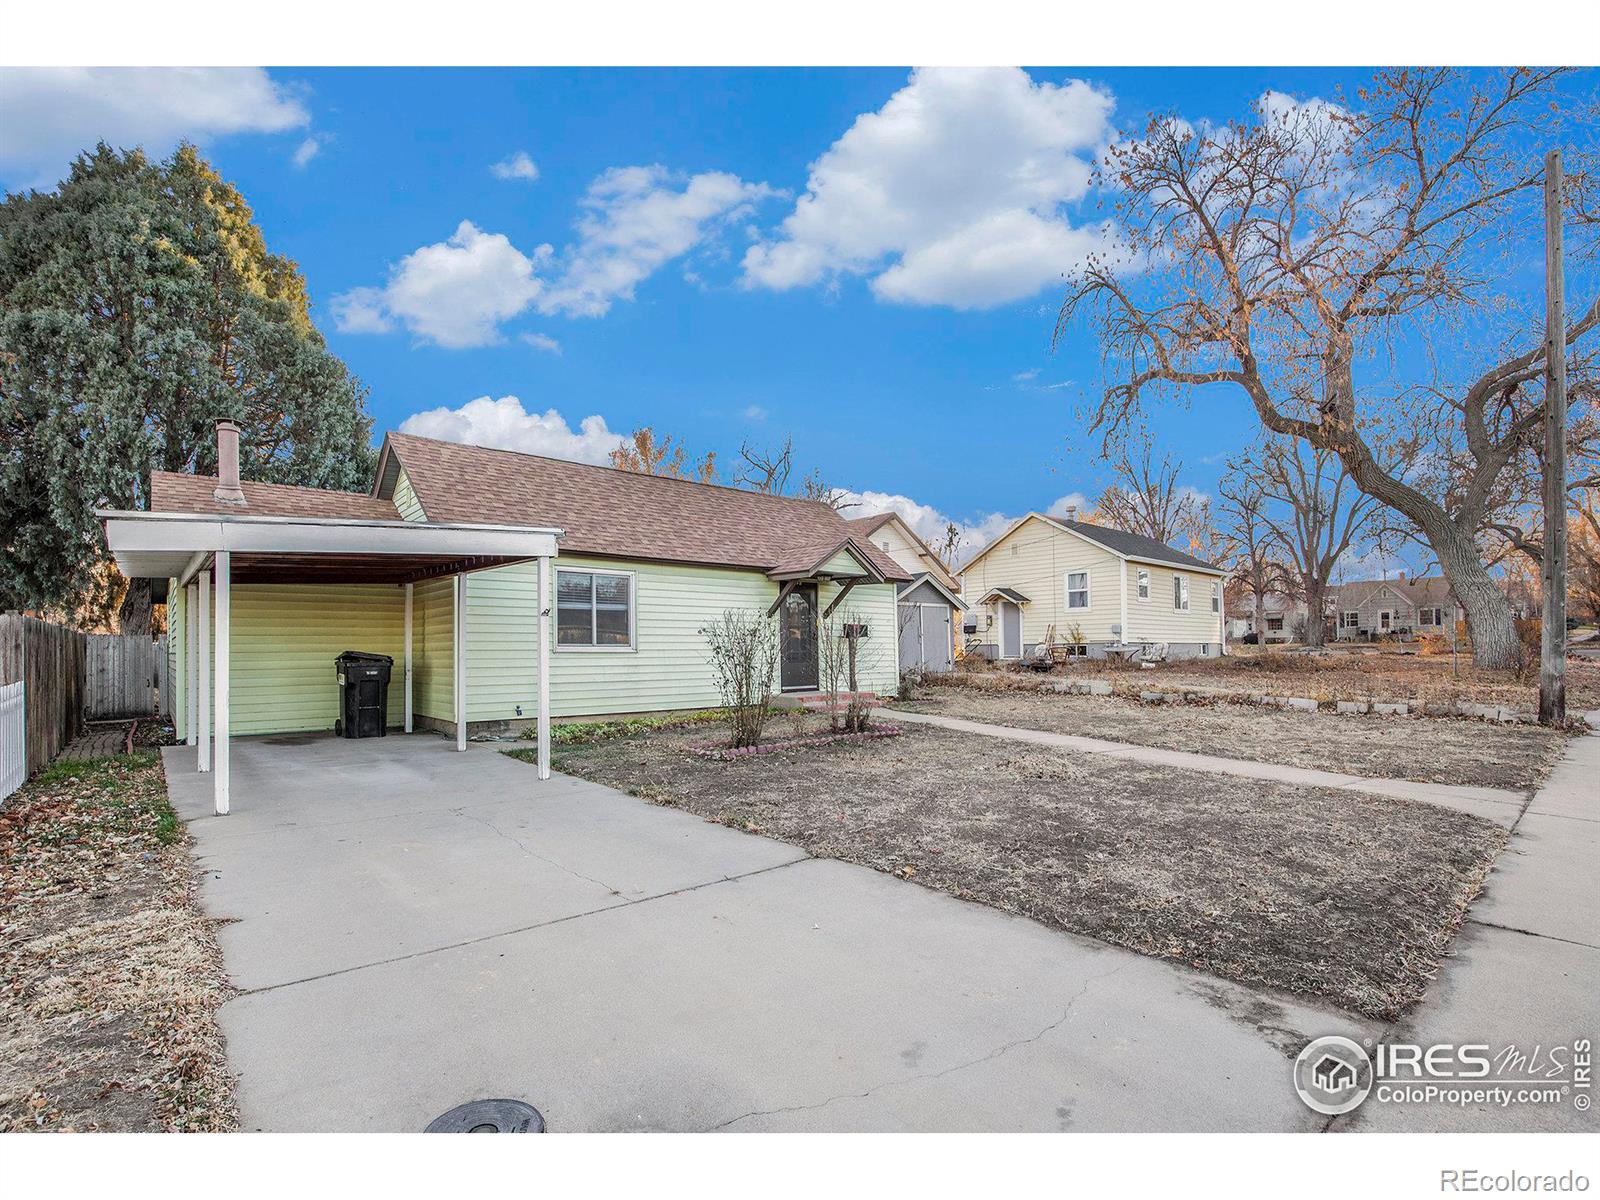 620  19th street, greeley sold home. Closed on 2023-12-29 for $298,500.